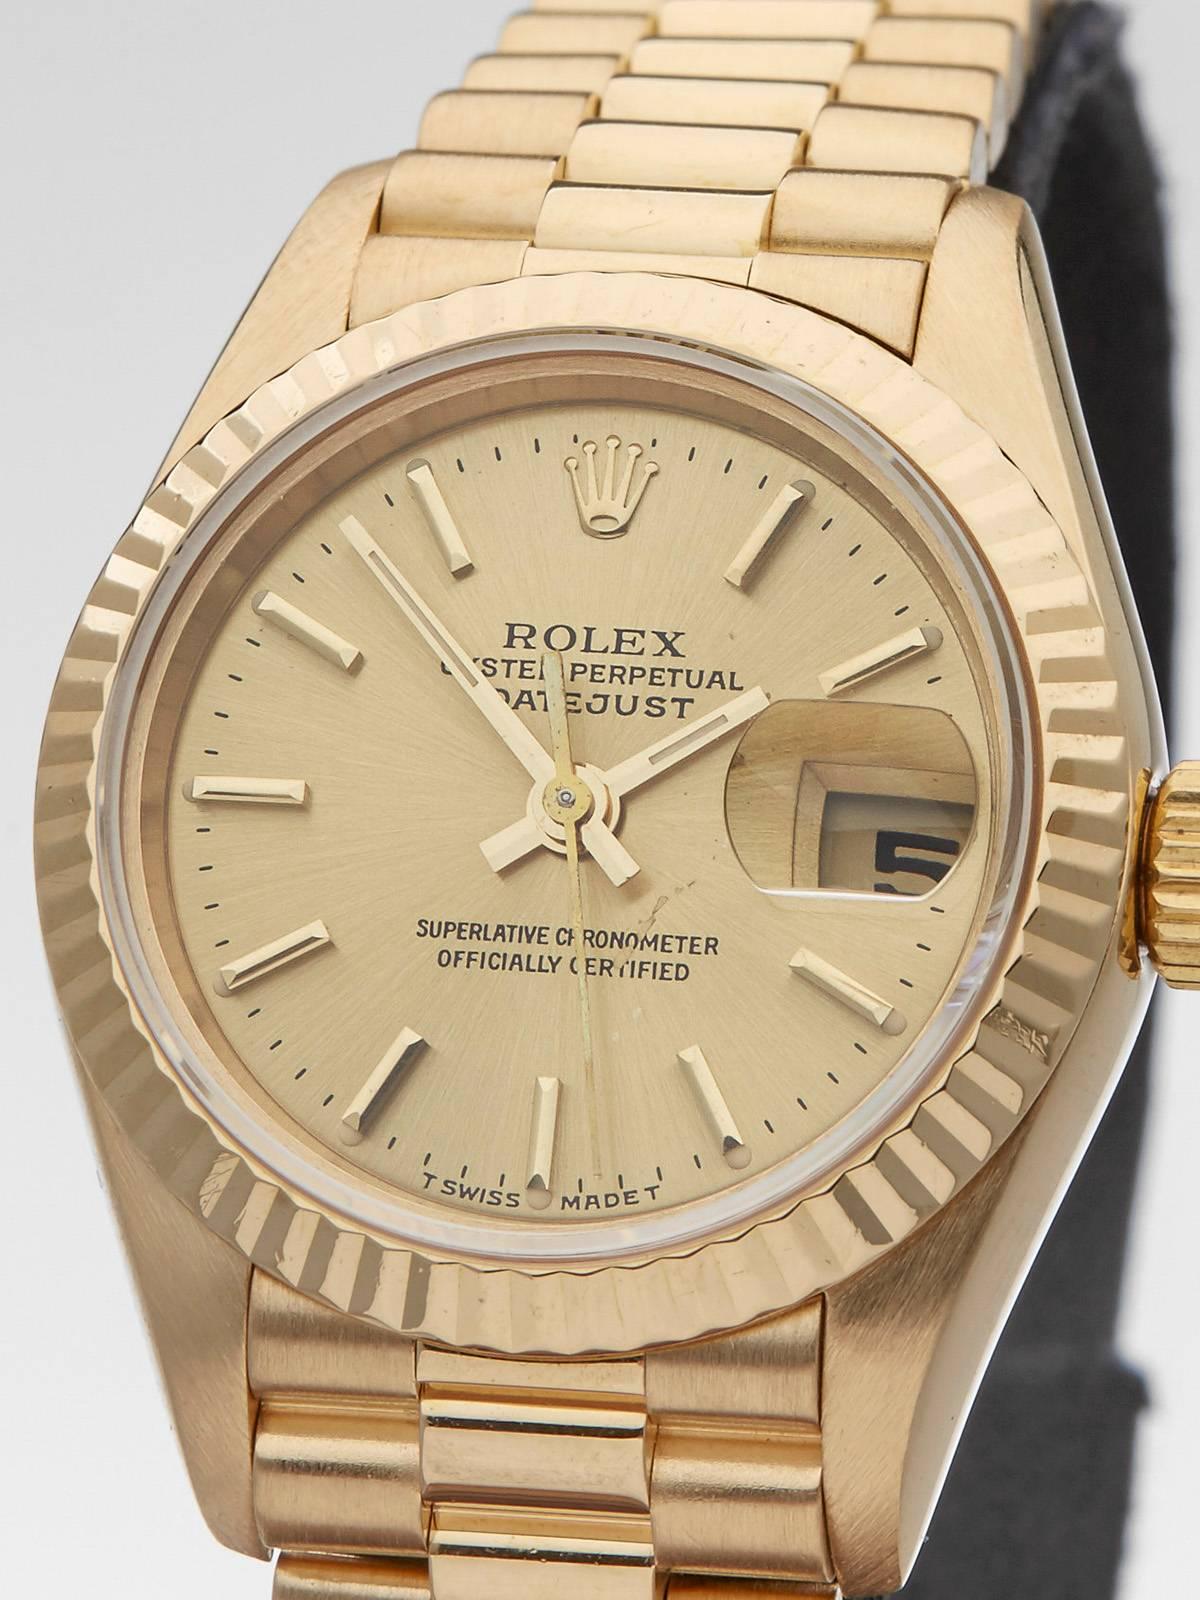 Ref: W3391
Model: 79178
Serial: U19****
Condition: 9 - Excellent condition
Age: 1997
Case Diameter: 26 mm
Case Size: 26mm
Box and Papers: Box and Manuals 
Movement: Automatic
Case: 18k Yellow Gold
Dial: Champagne Baton
Bracelet: 18k Yellow